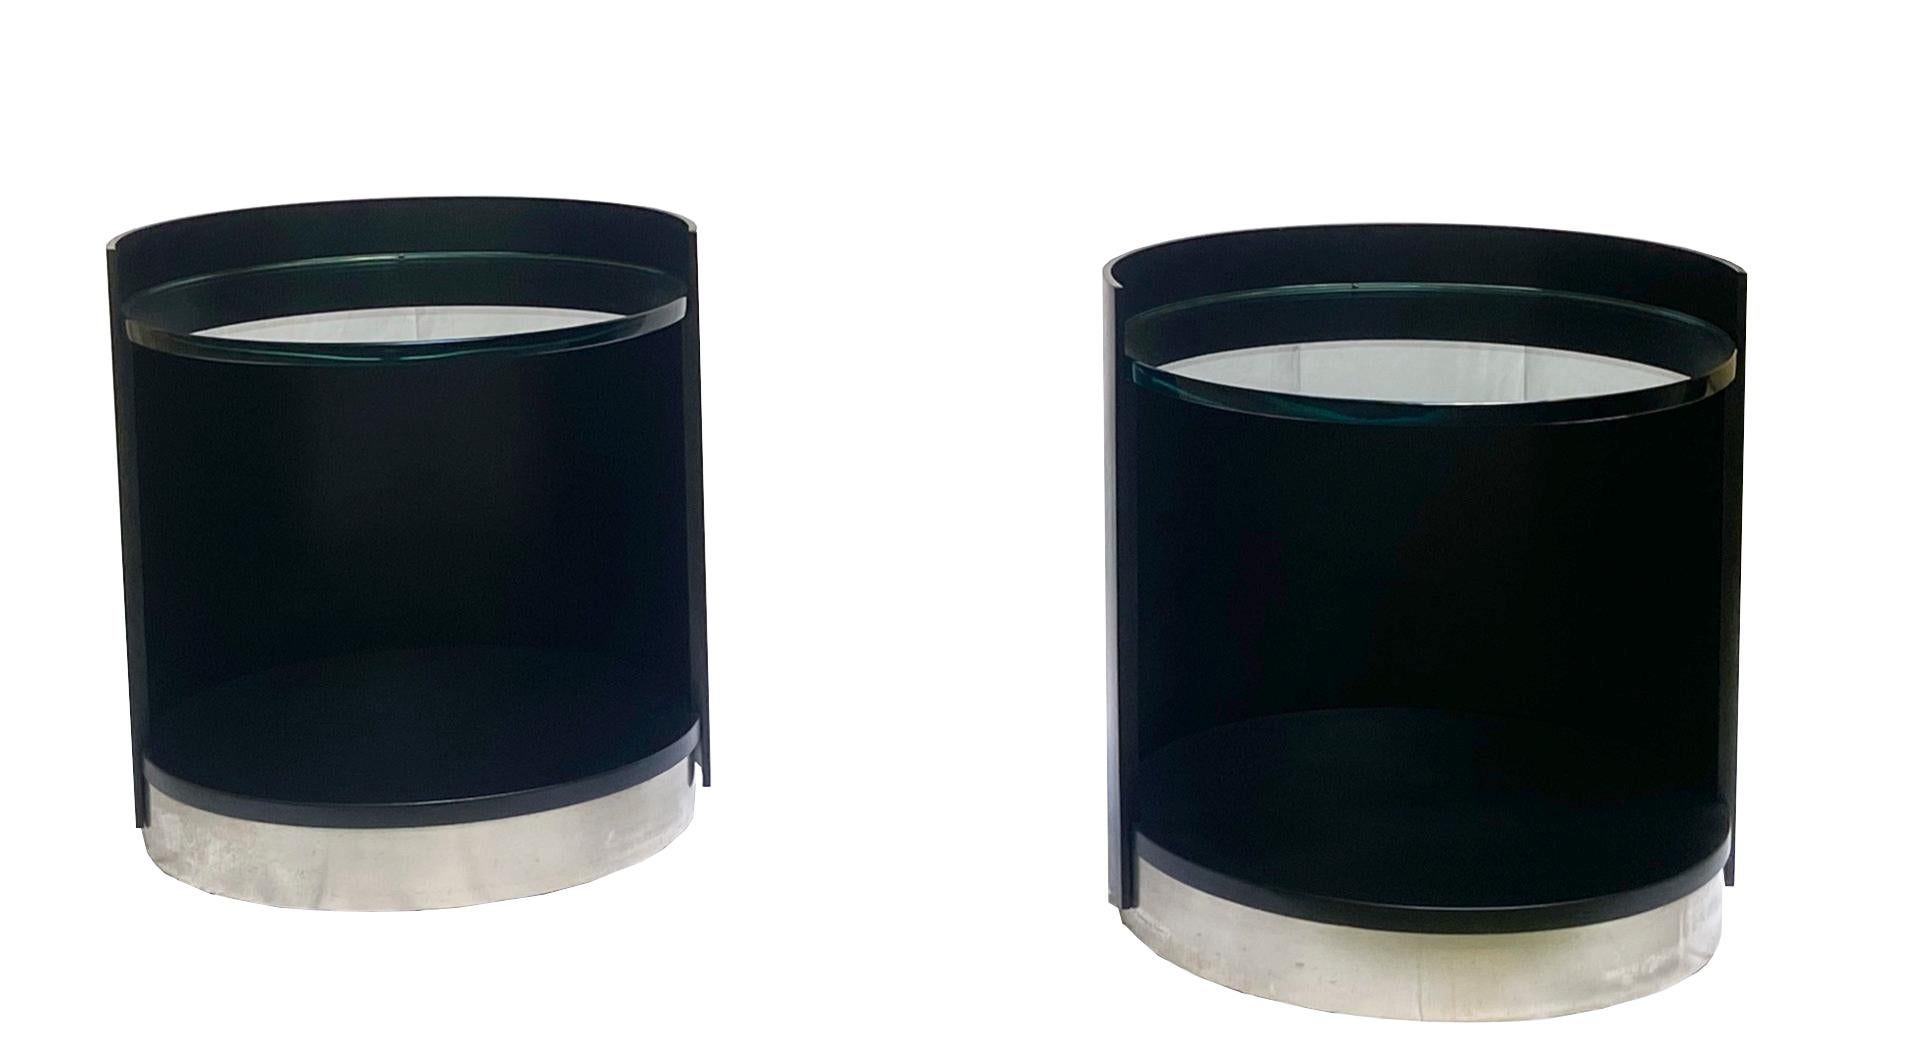 Pair of side tables, wood, glass and metal, Italy, 1970s.

Pair of nightstands in the style of Luigi Caccia Dominioni. 
The tables have a cylindrical shape, featuring a black lacquered wood frame that's open on one side. 
The top consists of a